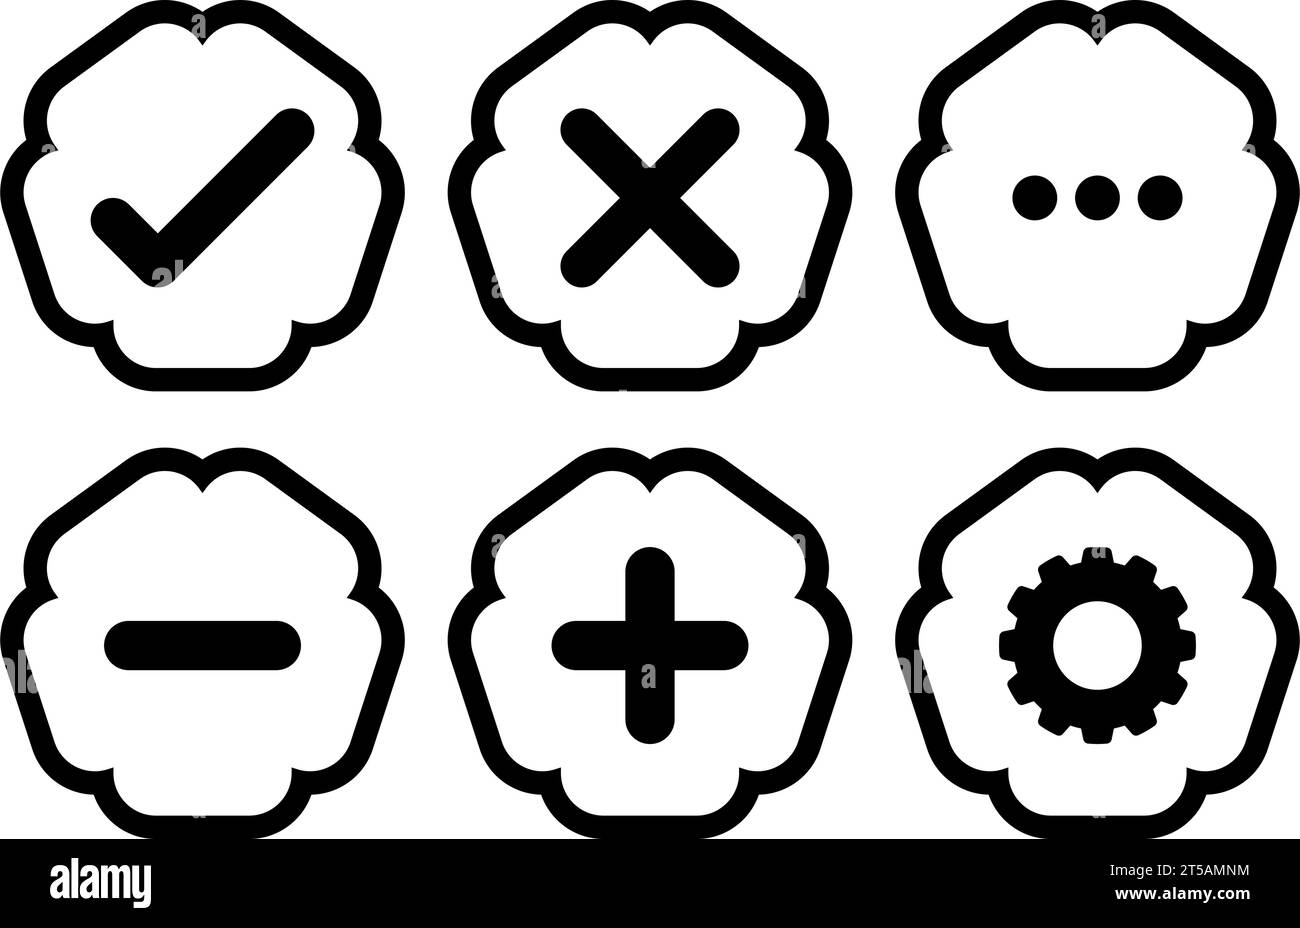 graphic illustrated Right wrong customize Jagged shape buttons icon set Stock Vector